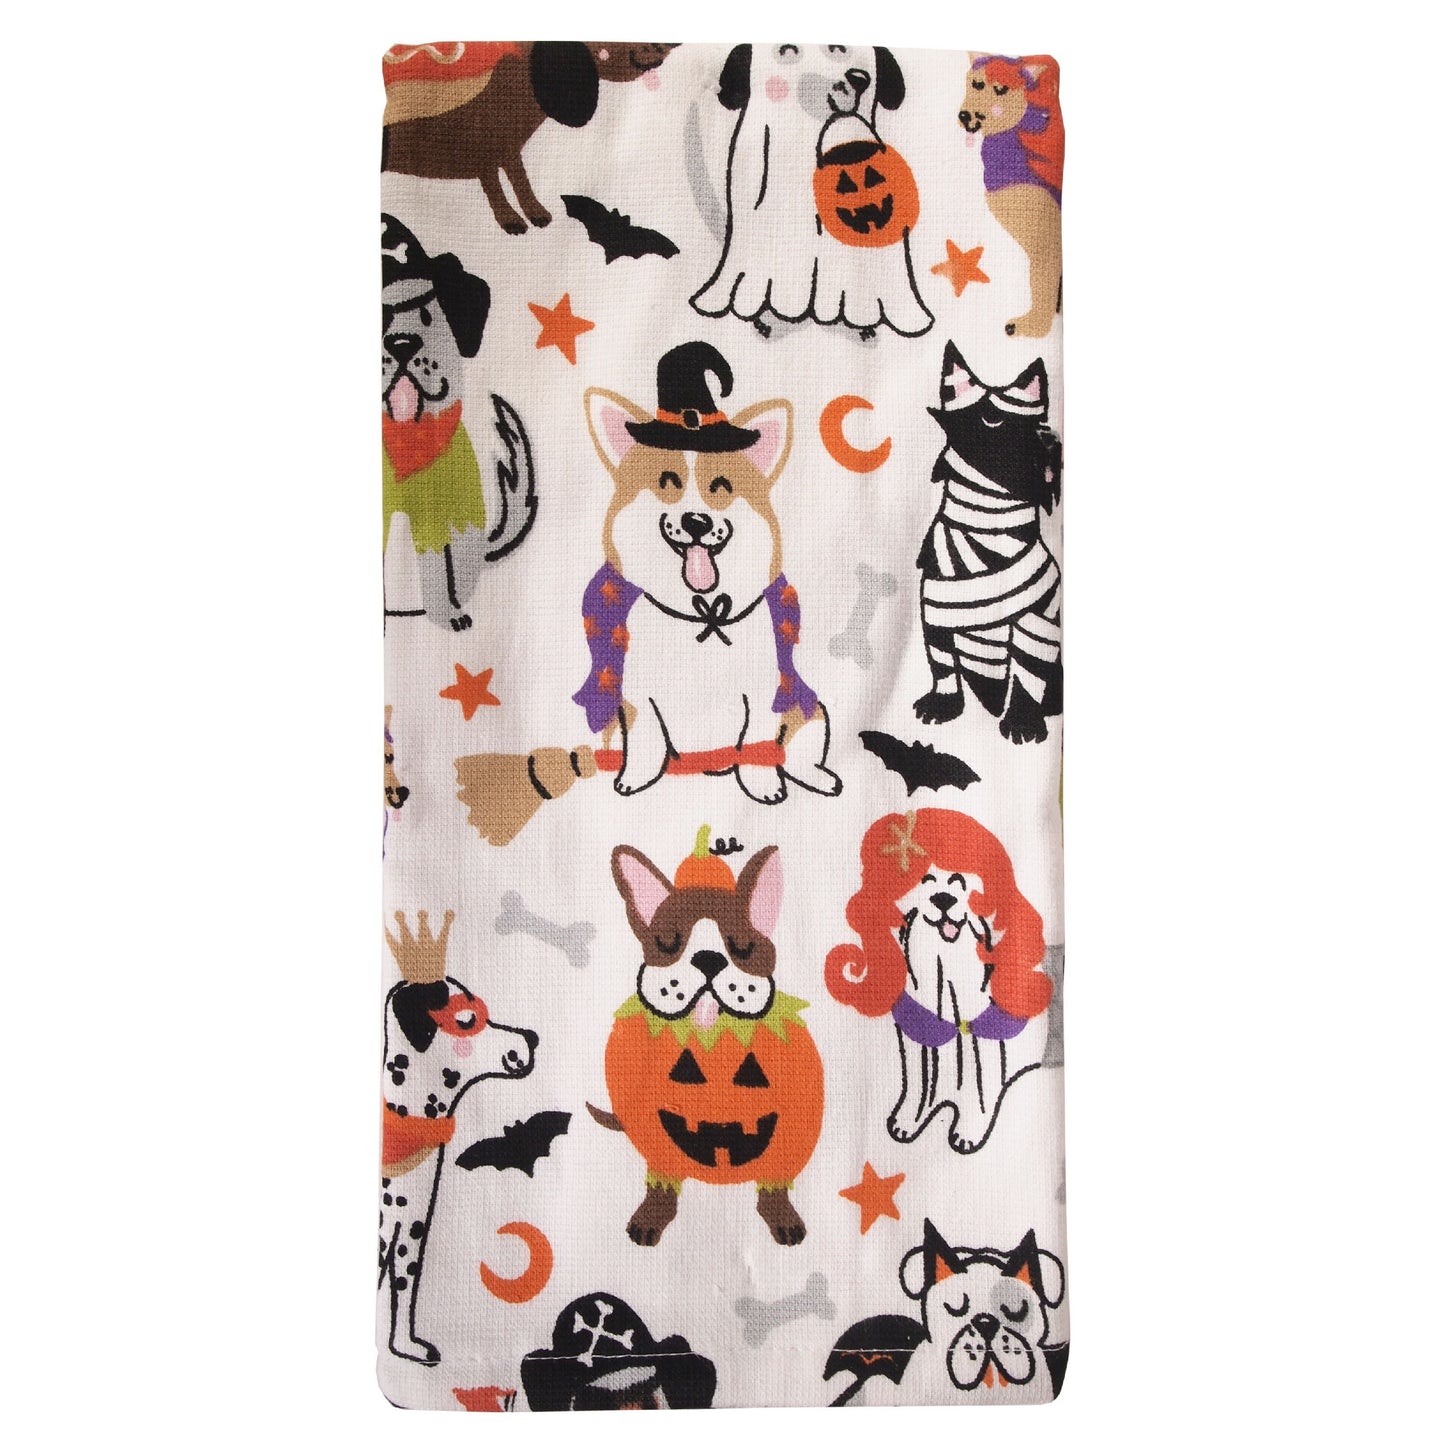 Halloween/Fall Dogs in Costumes Tea Towel - witches - mummies - unicorns